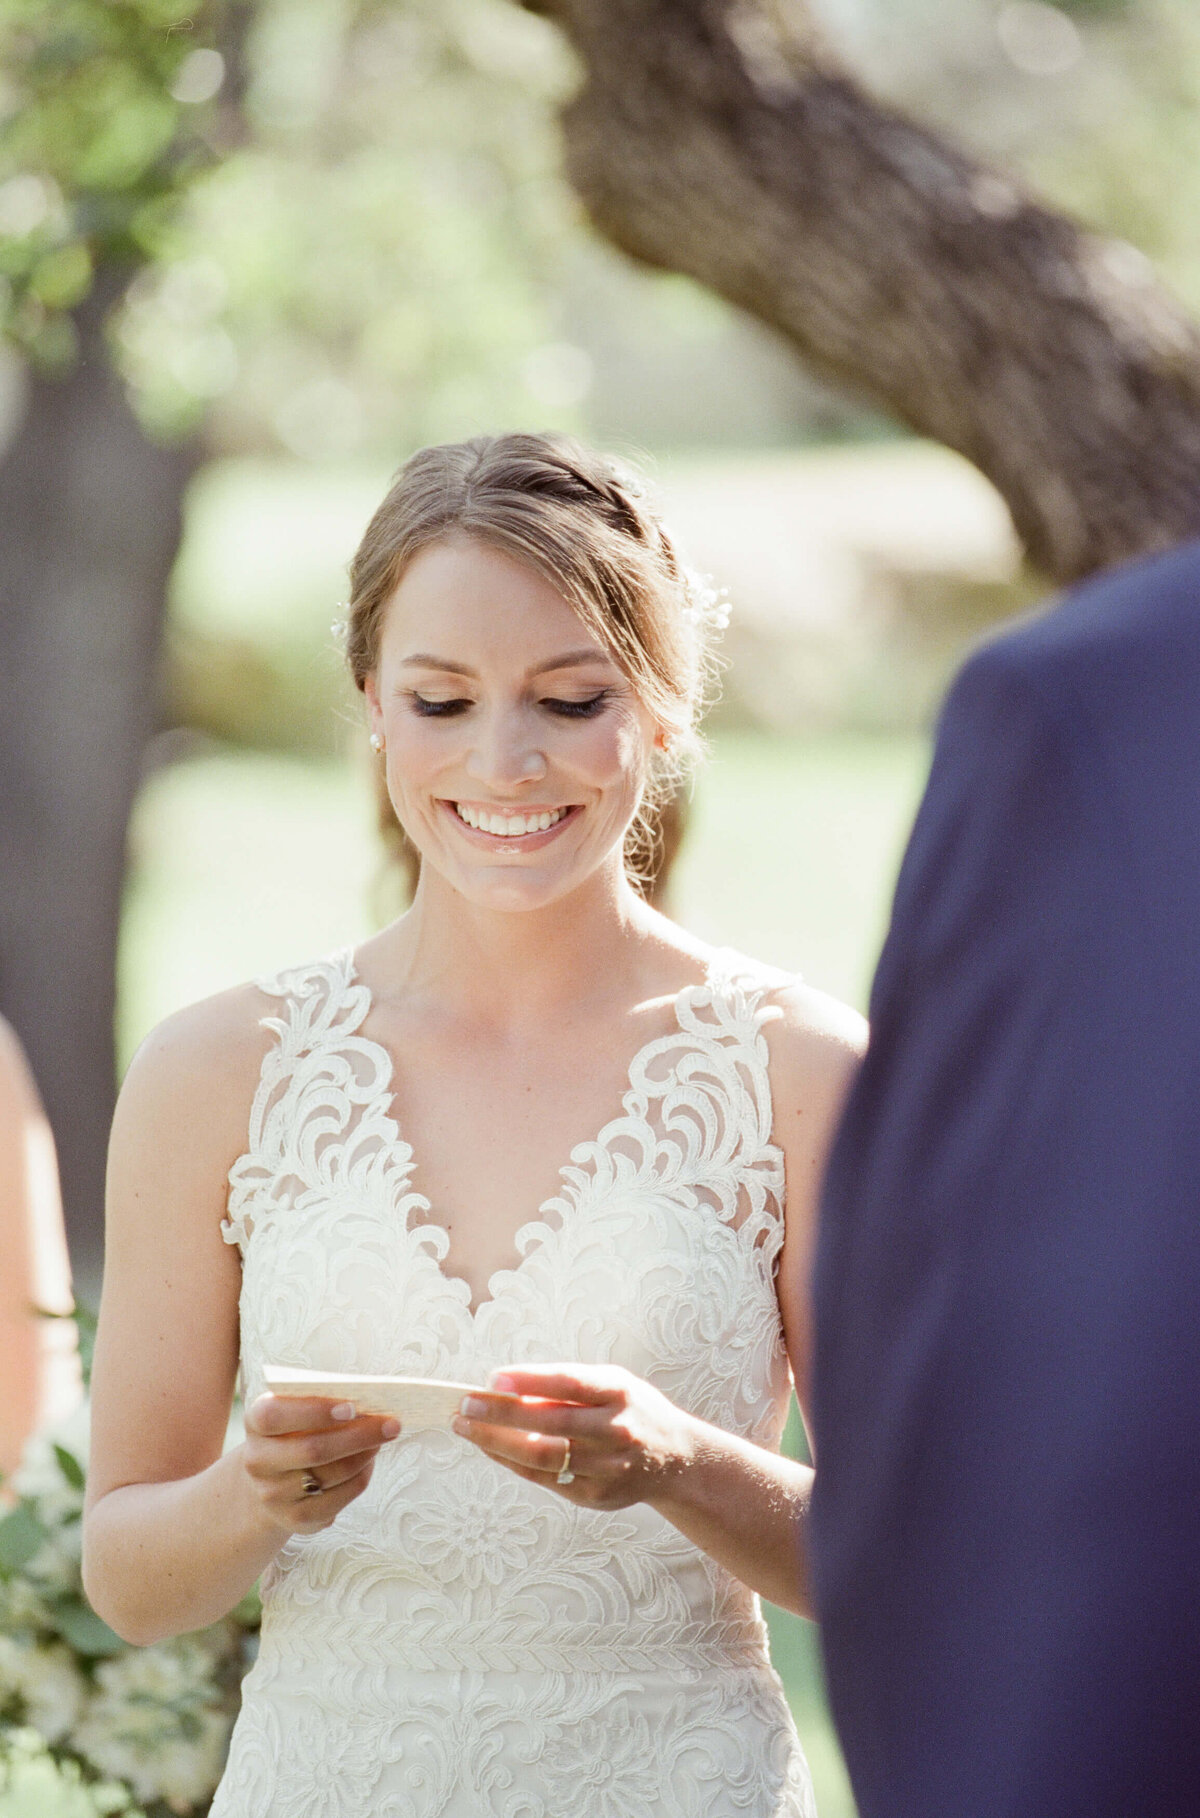 An exhilarated bride reads her wedding vows in an outdoor wedding venue.